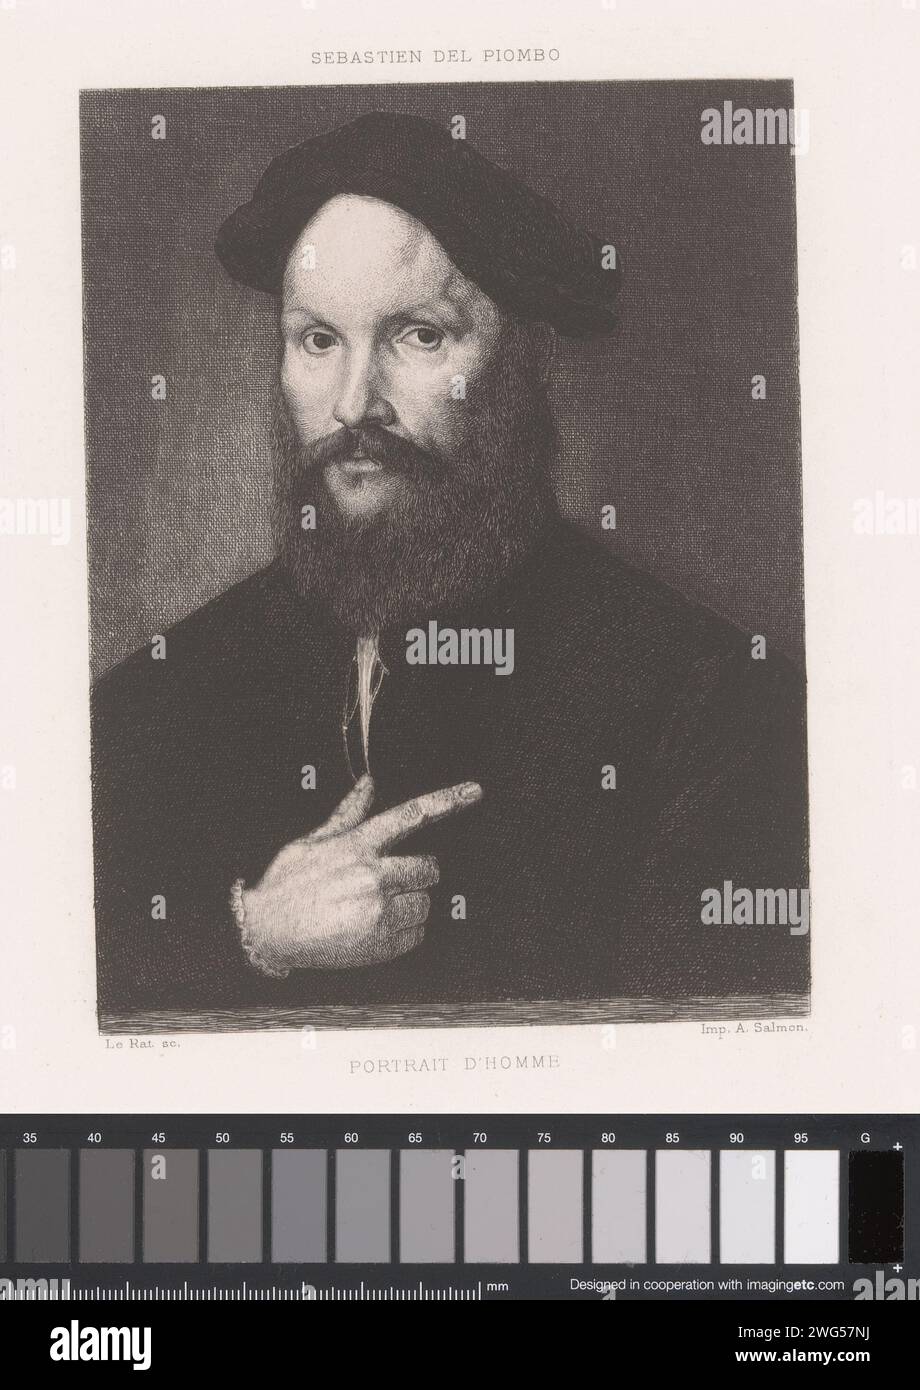 Portrait of an unknown man, Paul Edme Le Rat, After Sebastiano del Piombo, 1873 print   paper etching historical persons Stock Photo